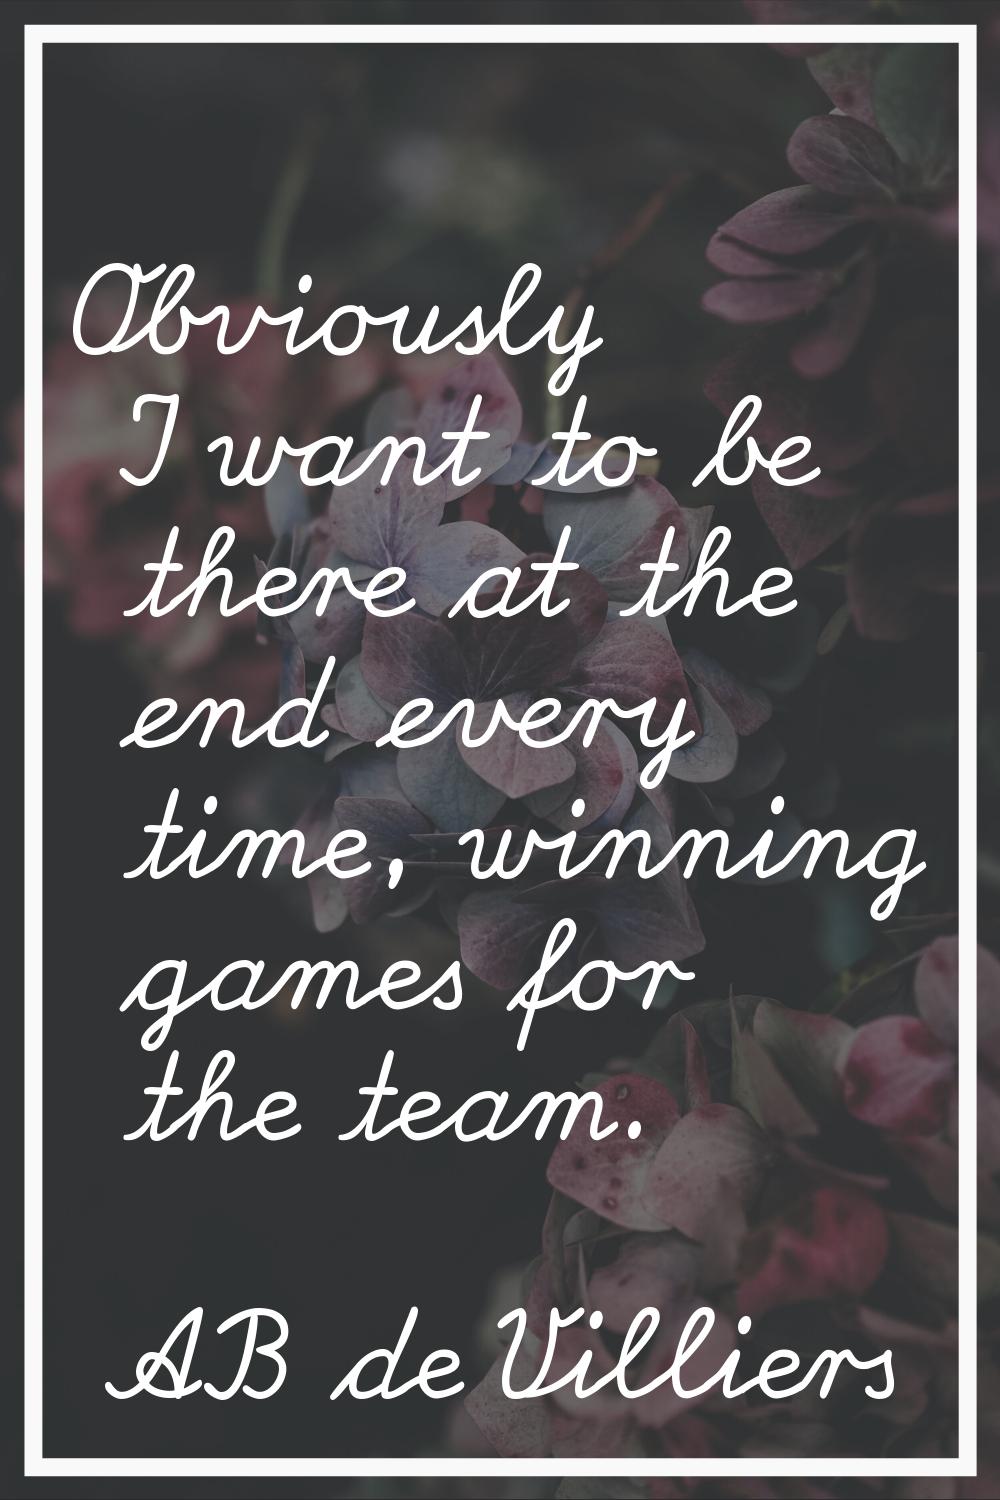 Obviously I want to be there at the end every time, winning games for the team.